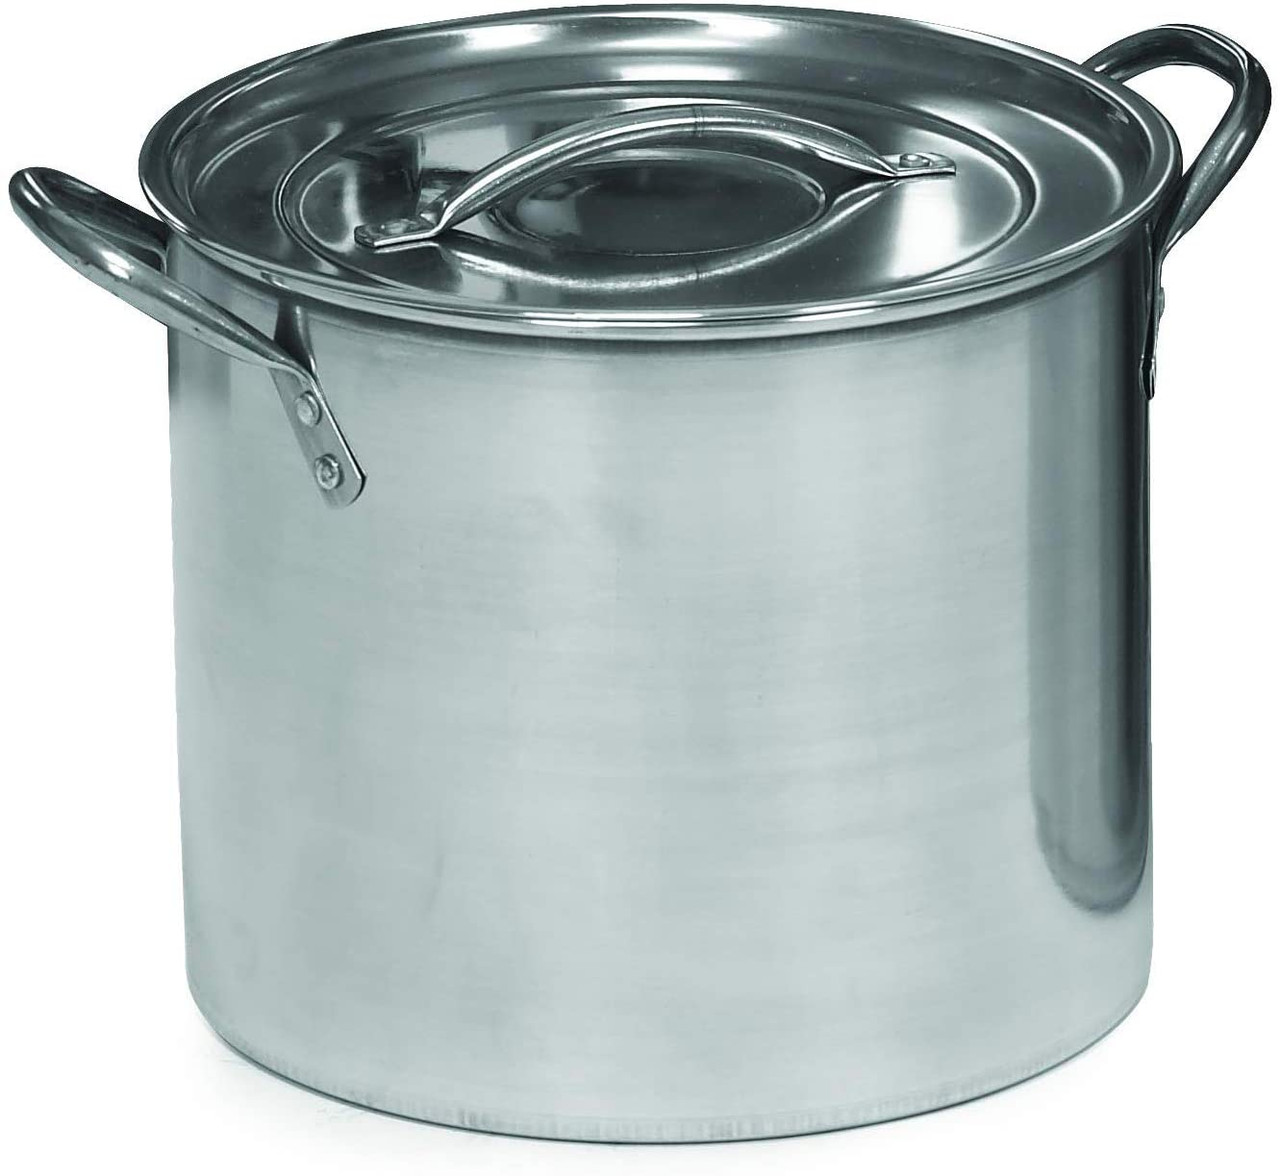 Imusa IMU-00080 Pot With Glass Lid And Bakelite Handle 8 Qt